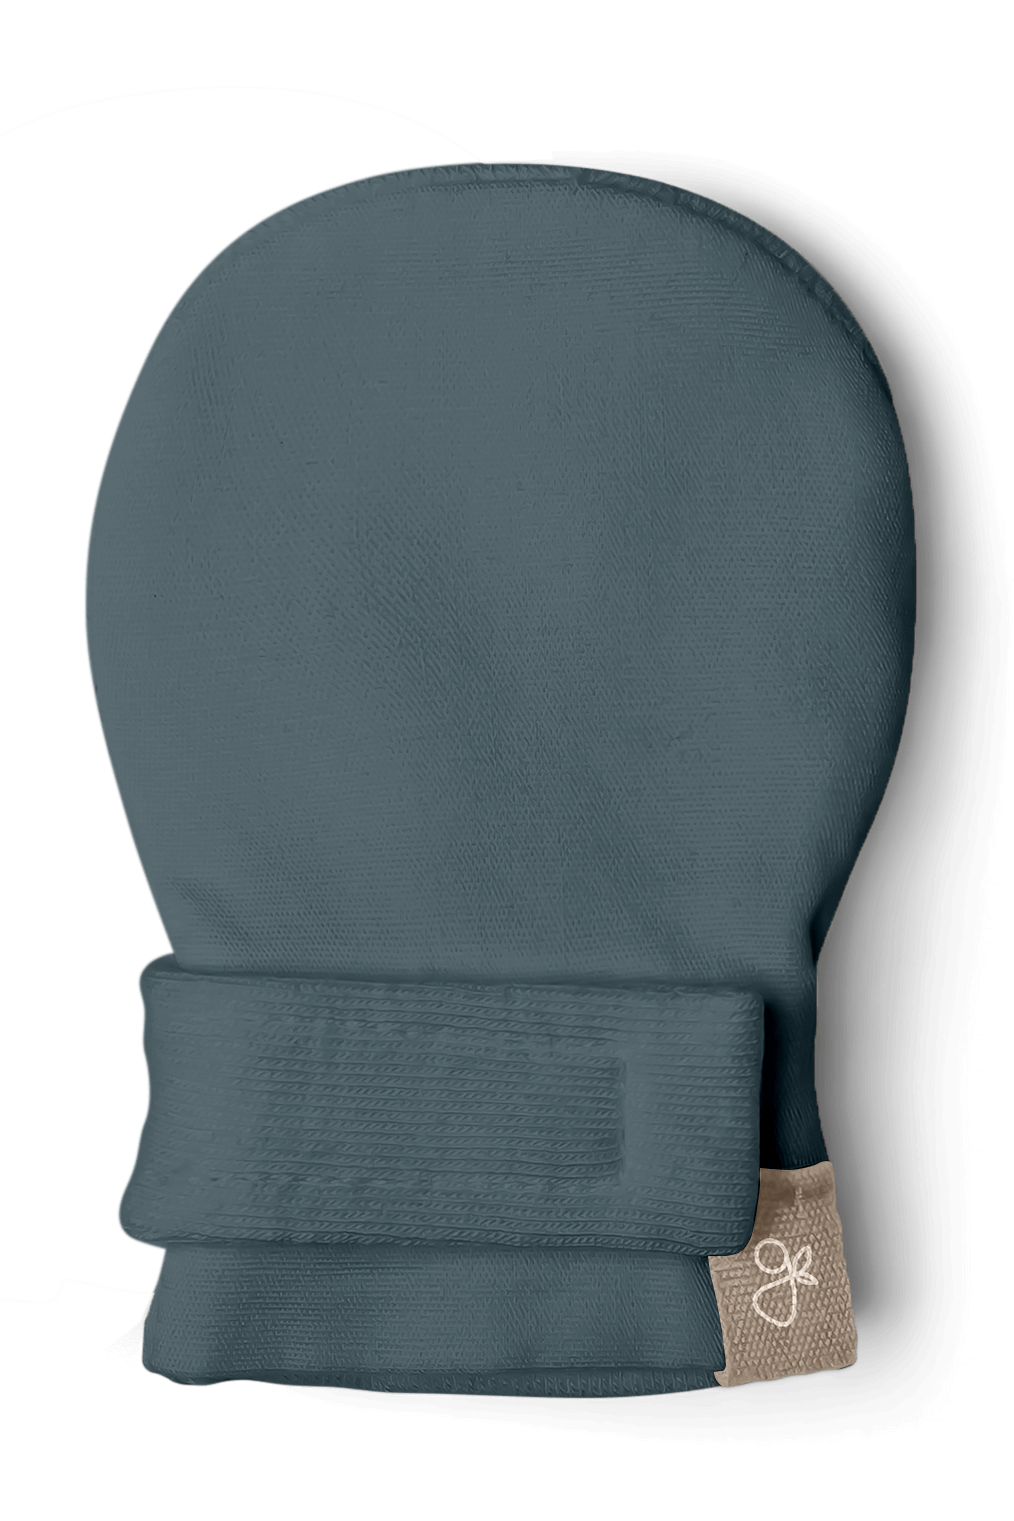 Goumi_Preemie_Mitts_Midnight_Front_Tan_Label.png